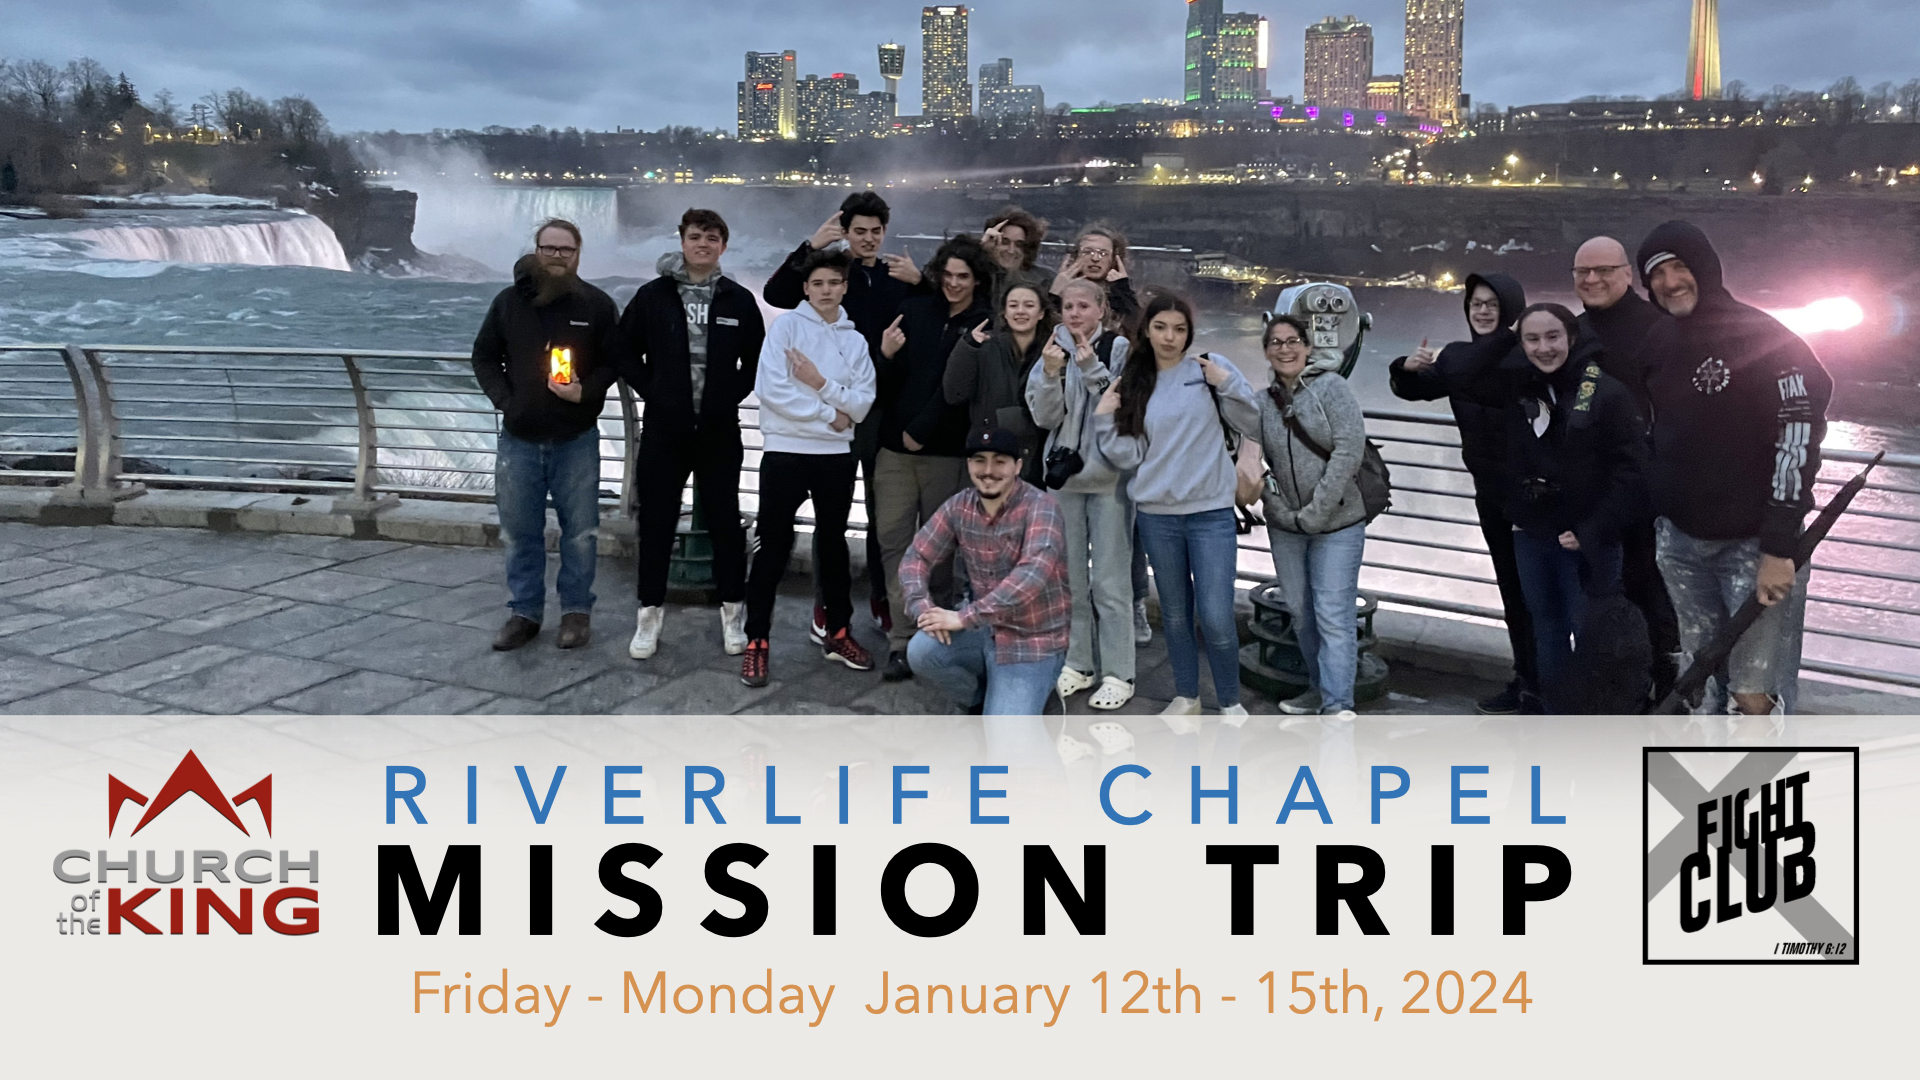 RiverLife Chapel Mission Trip - January 12-15